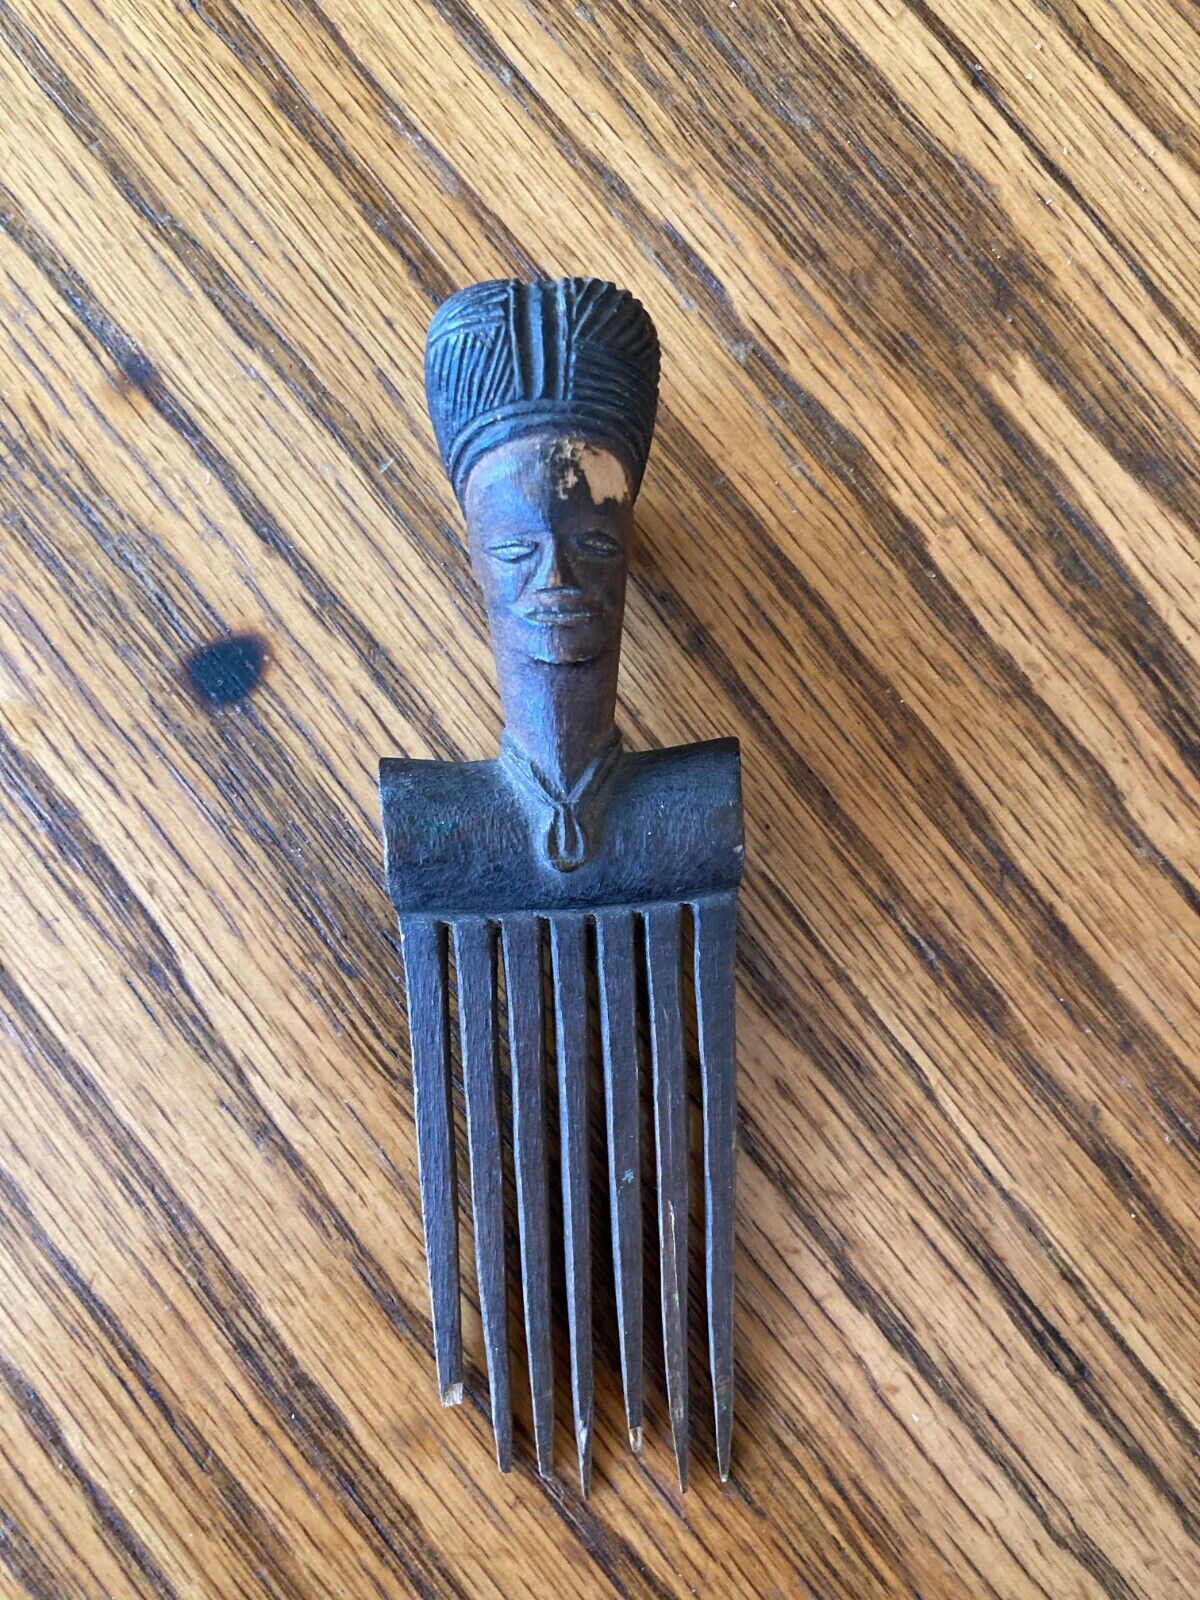 A WELL CARVED ANTIQUE AFRICAN HAIR COMB, WOMAN WITH HEADPIECE